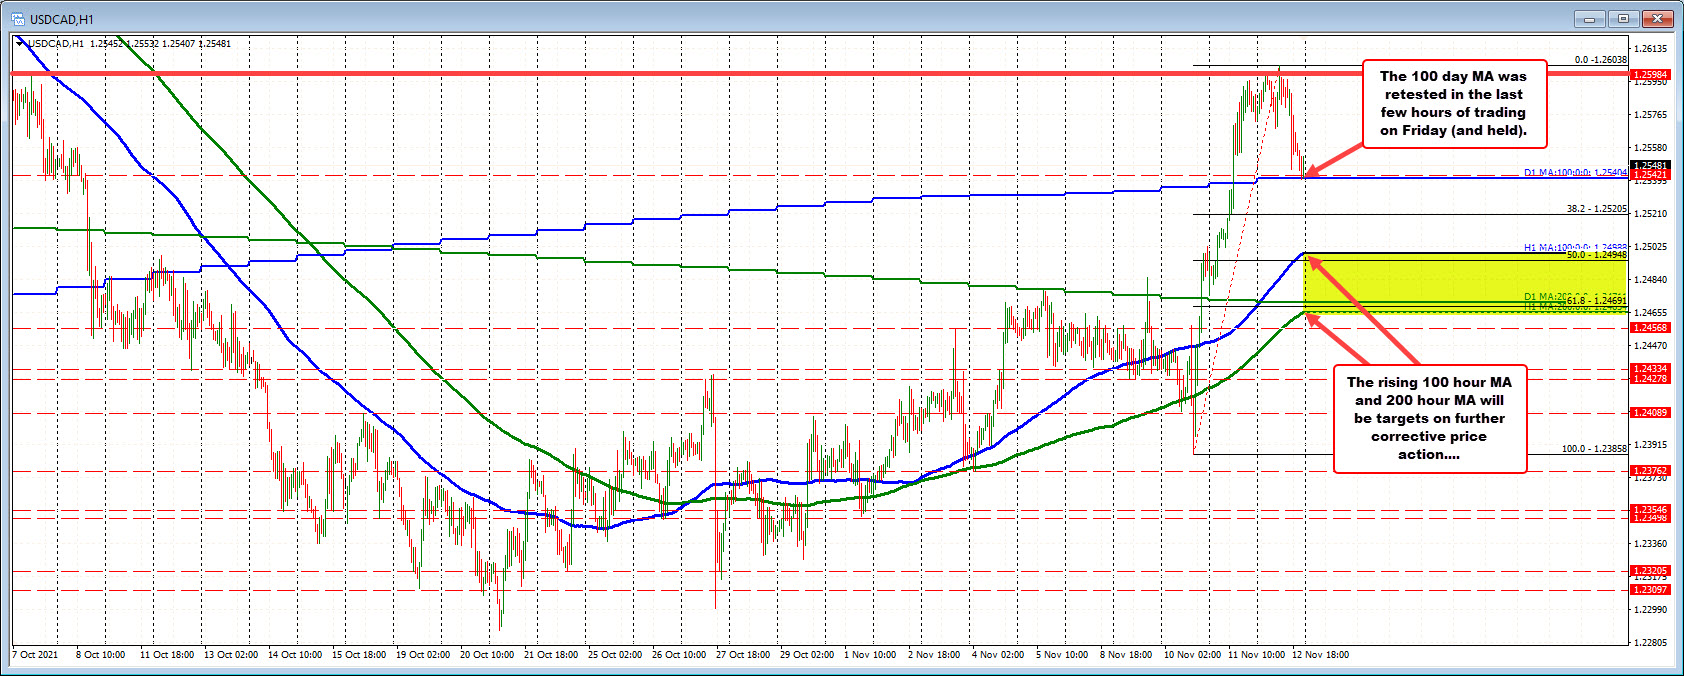 USDCAD on the hourly chart